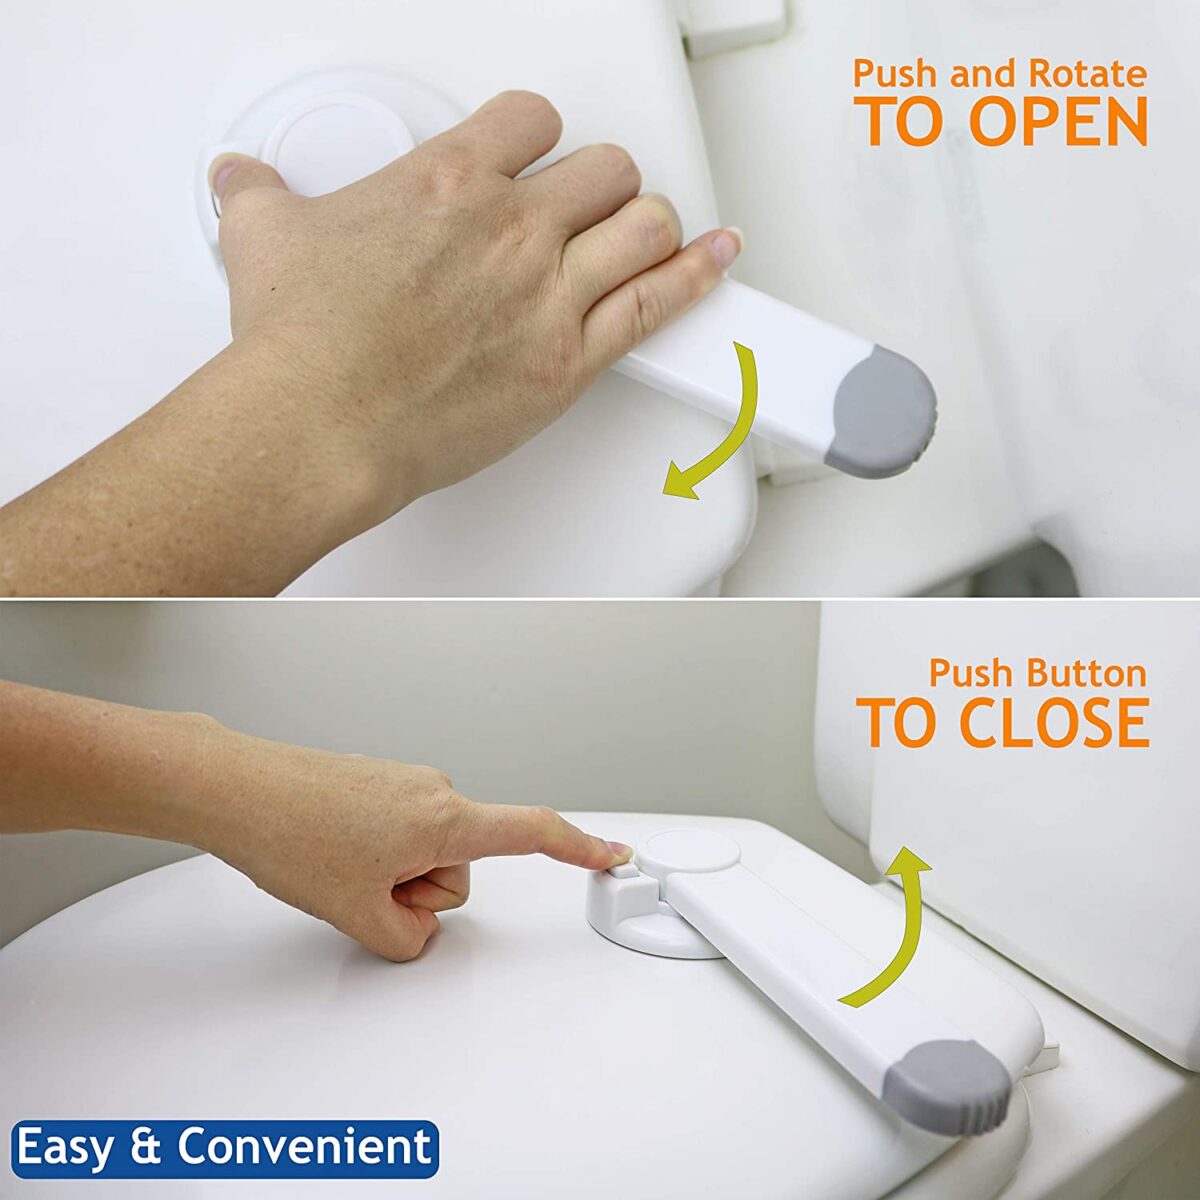 Baby Toilet Lock (2 Pack) Ideal Baby Proof Toilet Lid Lock with Arm, Top Safety Toilet Seat Lock White